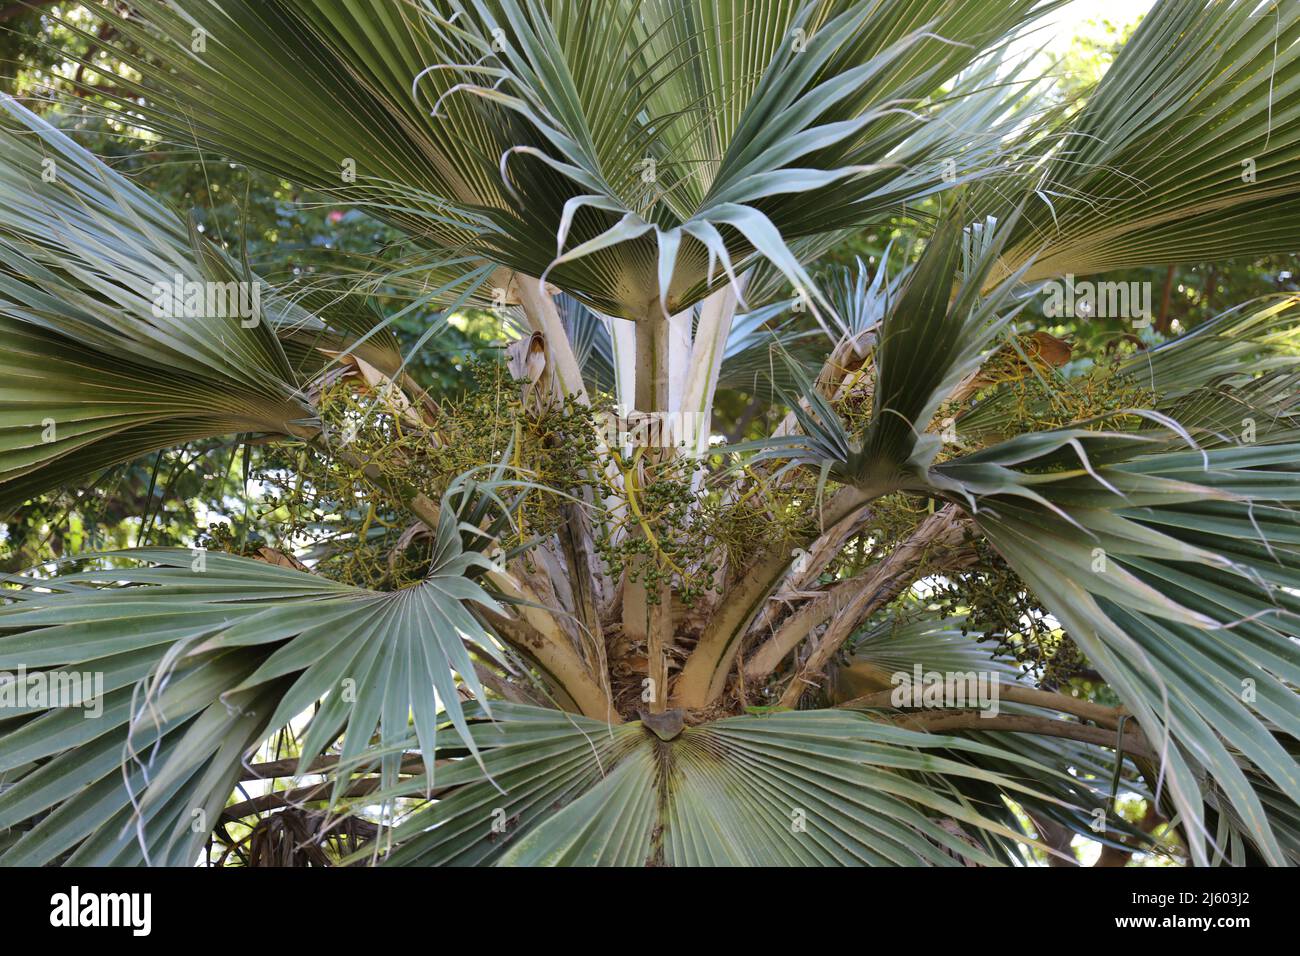 Close up of the small, green fruit, fronds and leaves of a Pritchardia munroi, Loulu, Palm tree in Kauai, Hawaii, USA Stock Photo